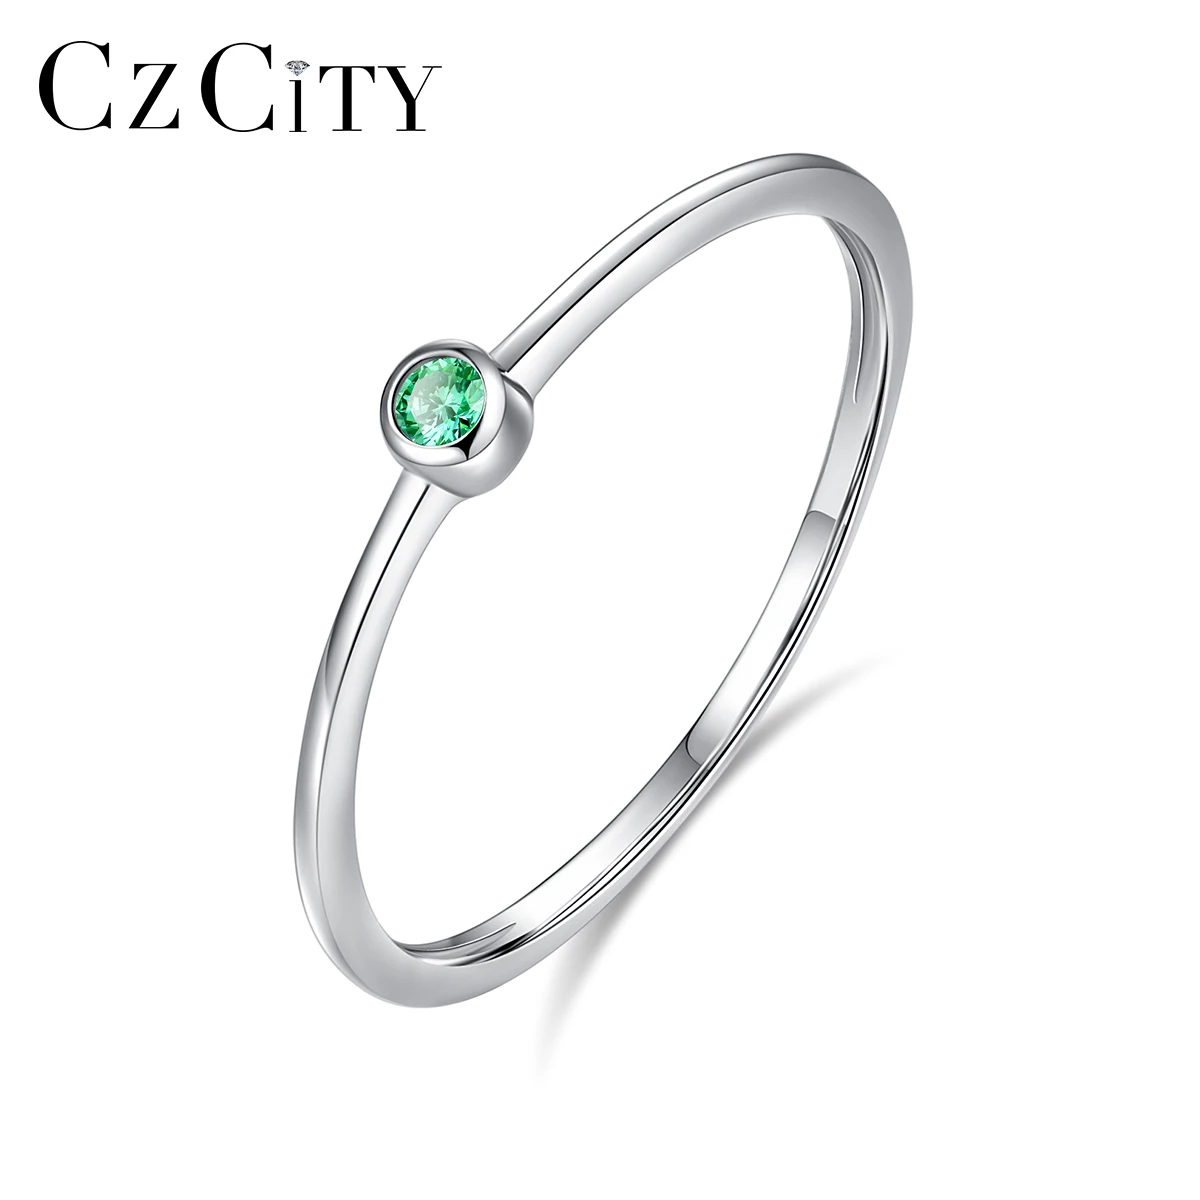 

CZCITY Ruby Emerald Pink Colors Small Round Gem Insert Rings Female Jewelry 925 Sterling Silver Ring With Gemstone